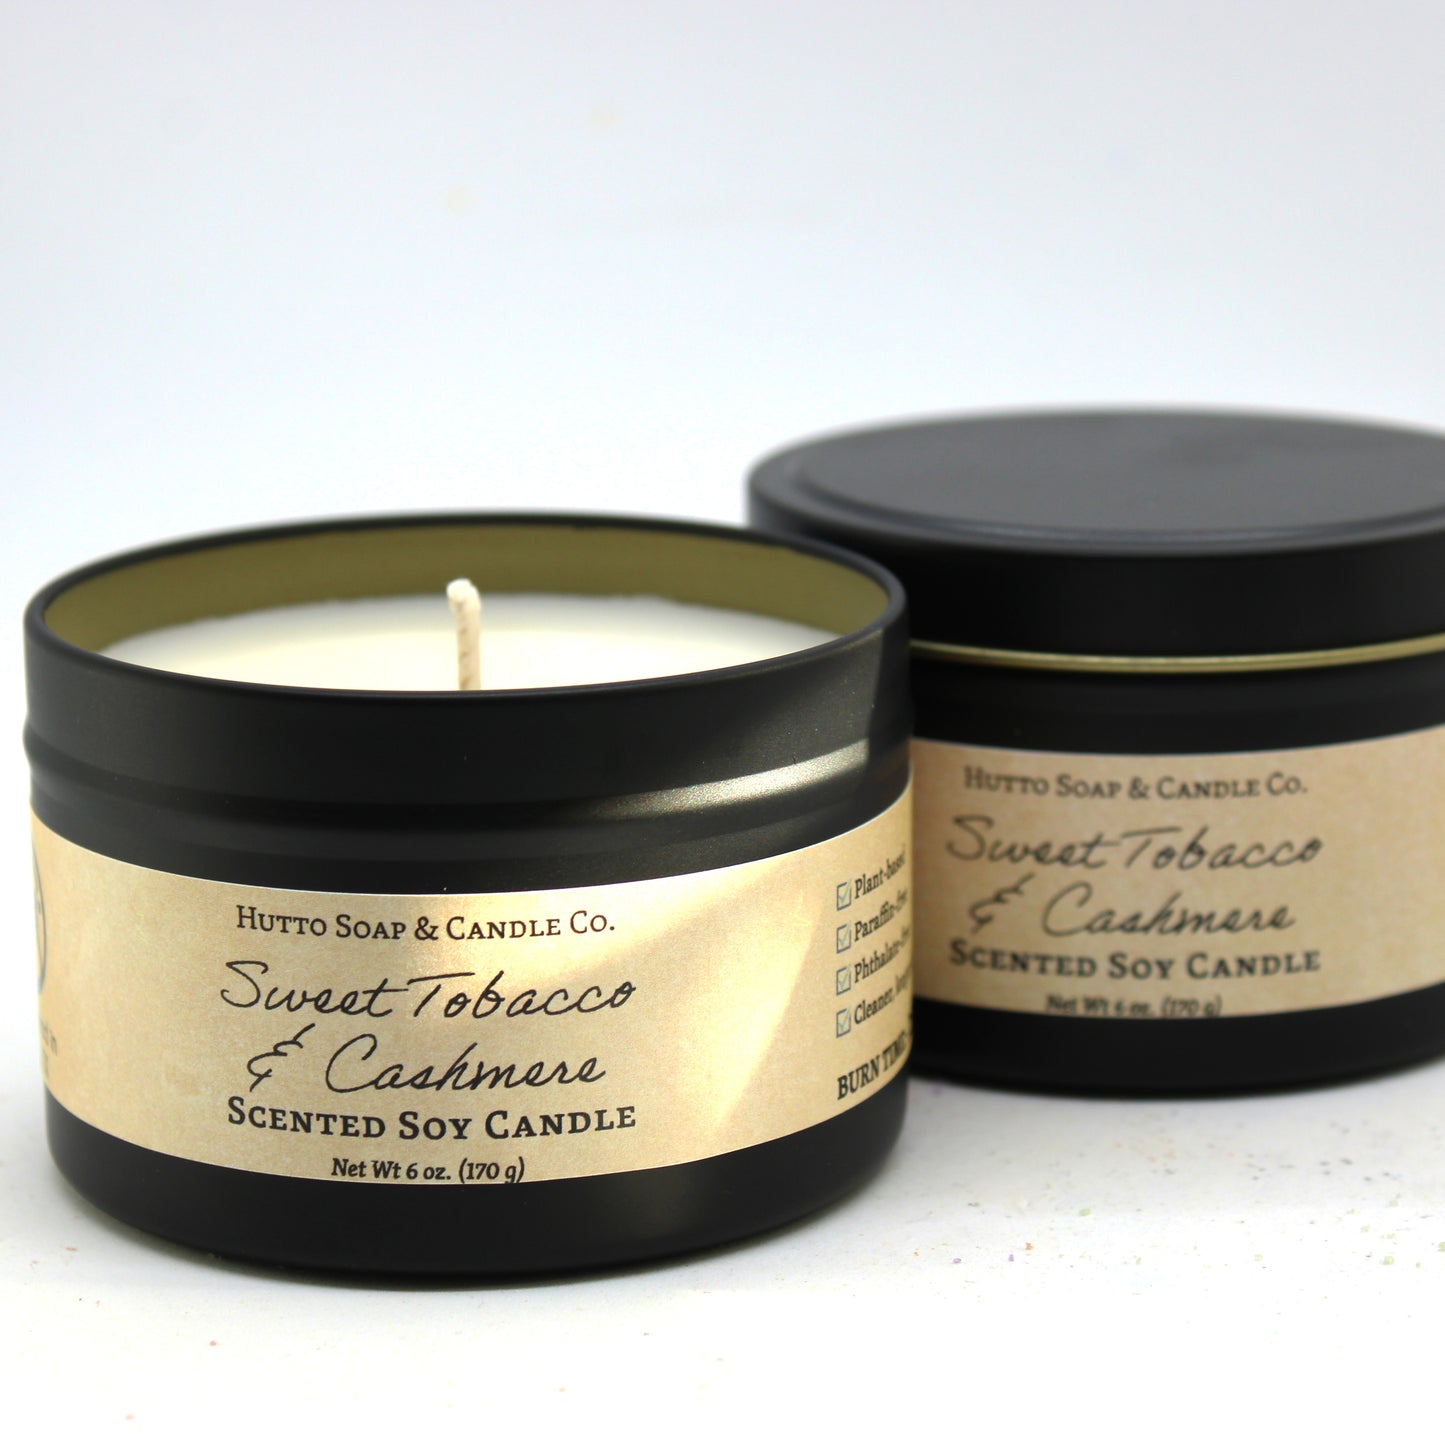 Sweet Tobacco & Cashmere Candle